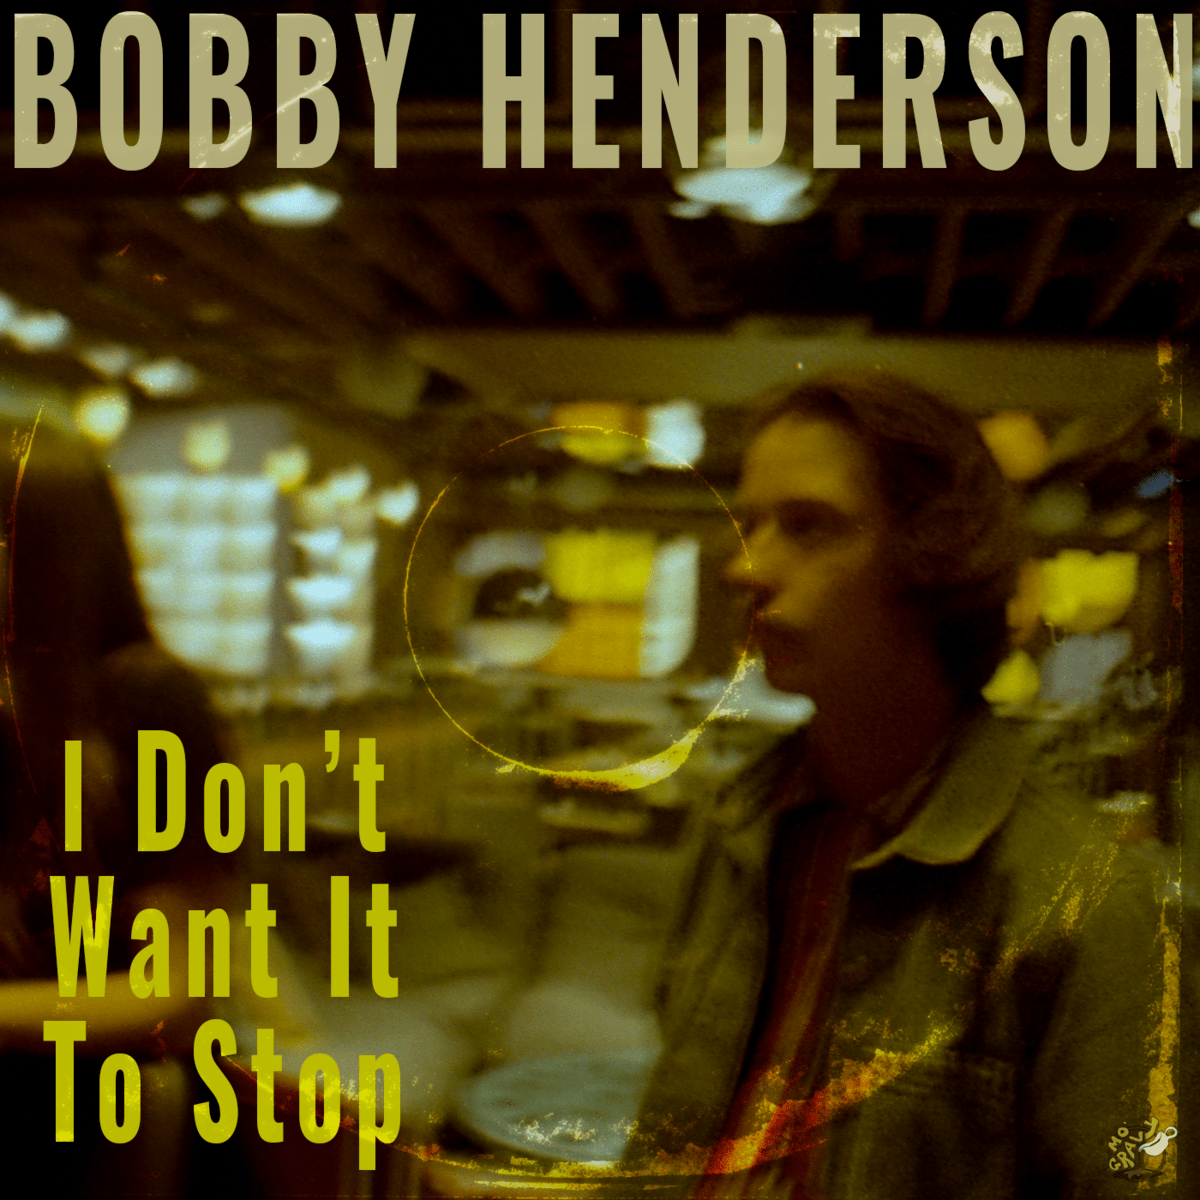 Featured image for “Bobby Henderson “I Don’t Want It To Stop” Single Release November 10th”